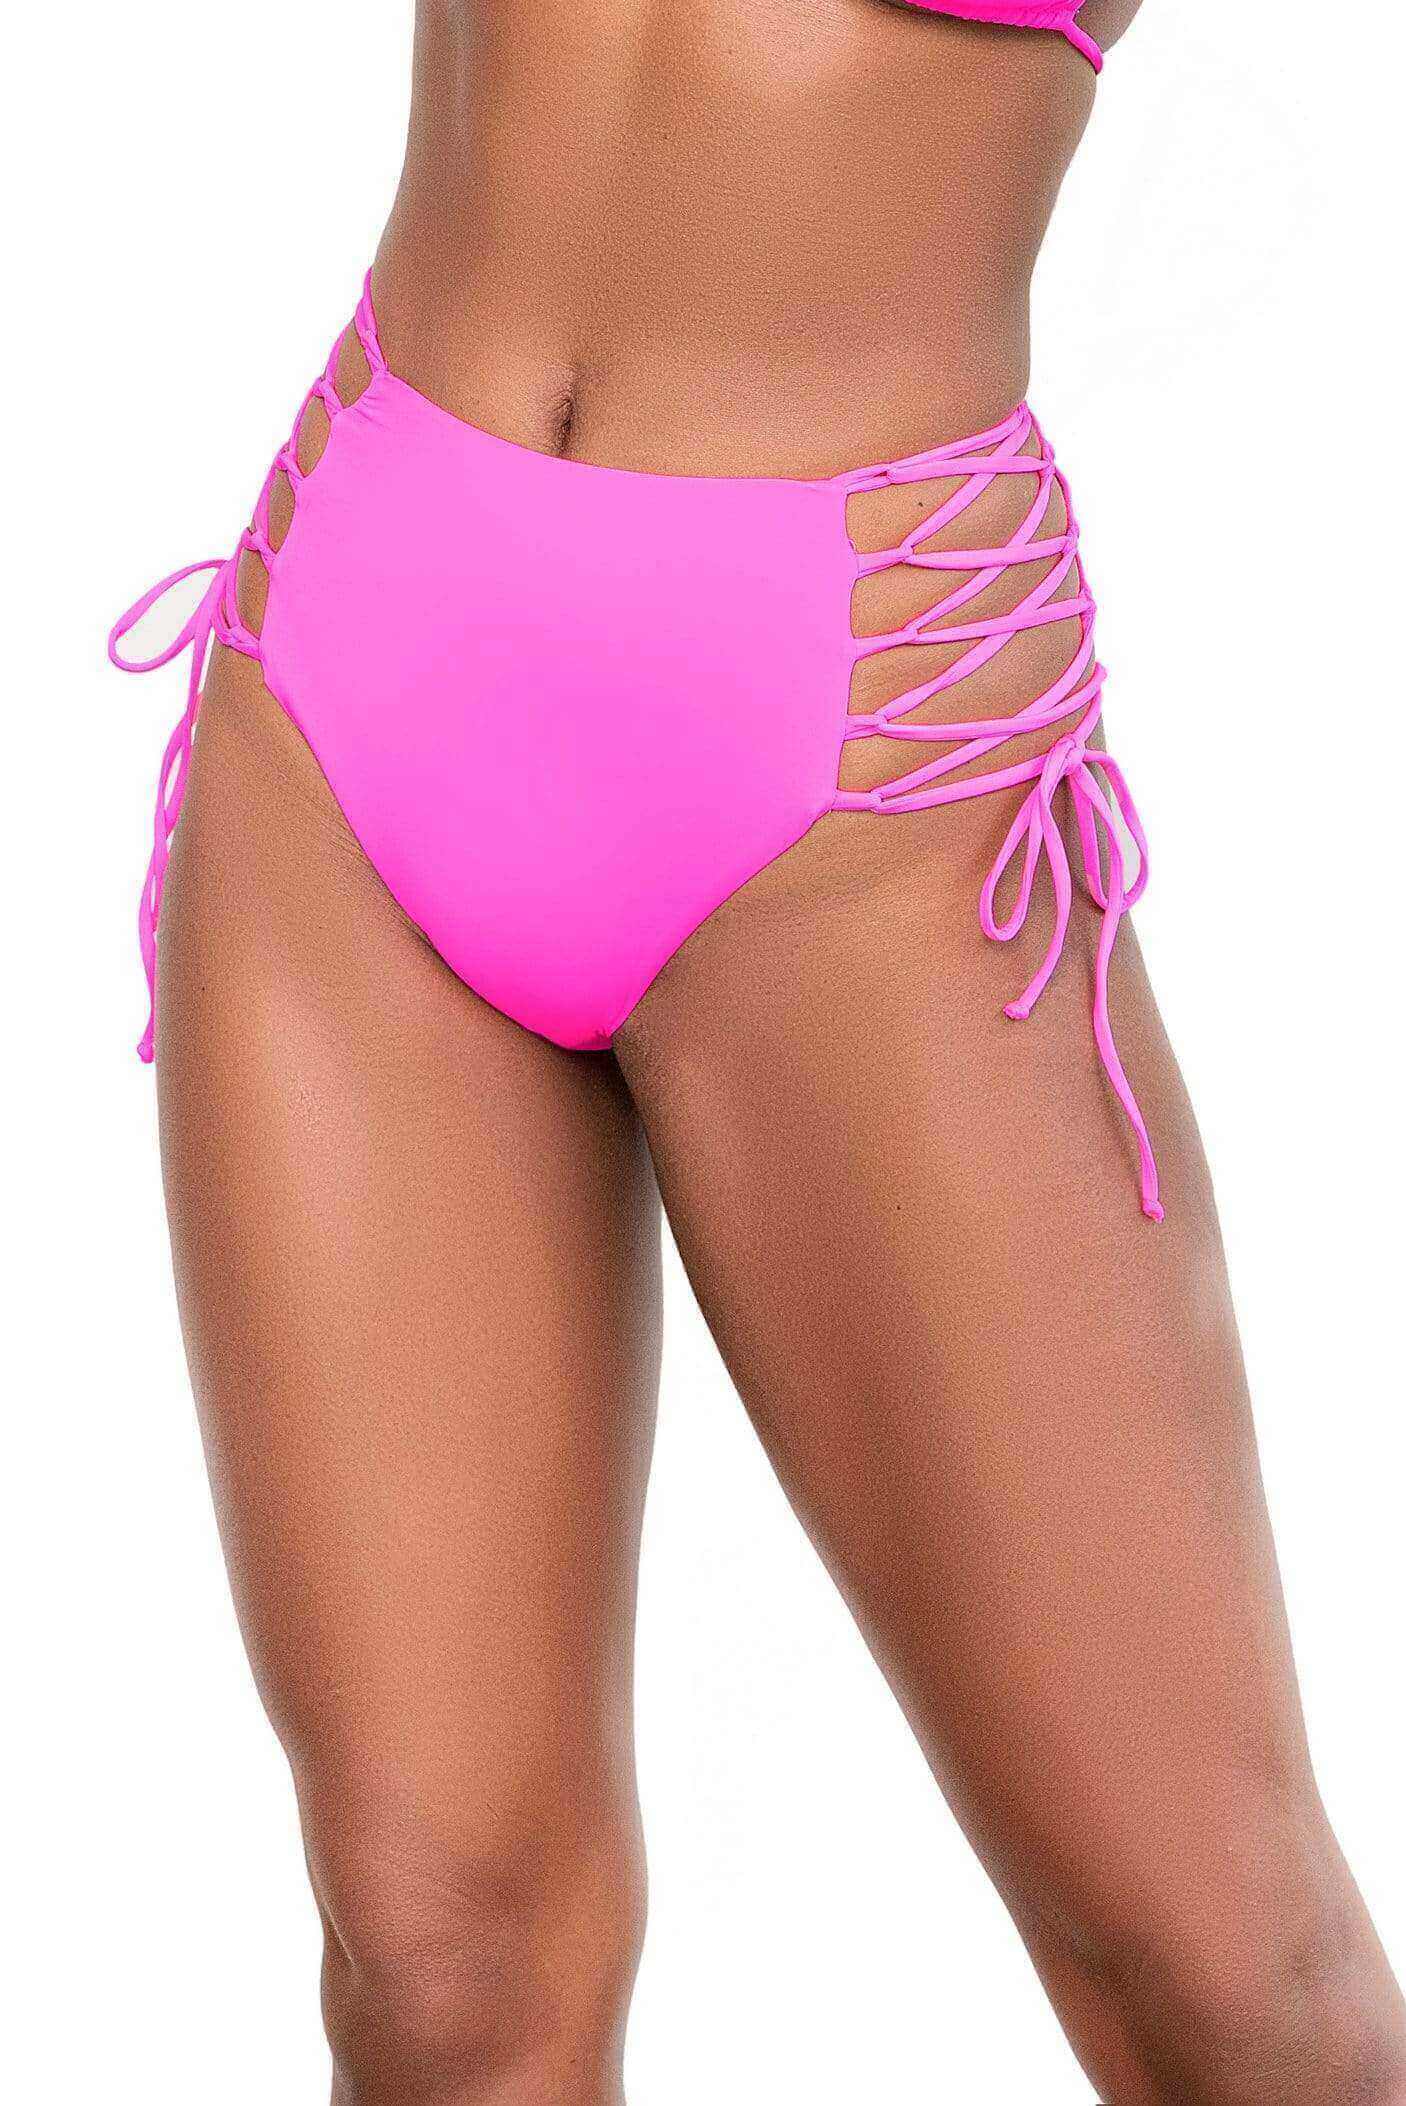 Mapale Apparel & Accessories > Clothing > Swimwear Pink / S/M Black Strap Side Tie High Waist Bottom Separates (Many colors available) Black Strap Side Tie High Waist Bottom Separates | MAPALE 6649